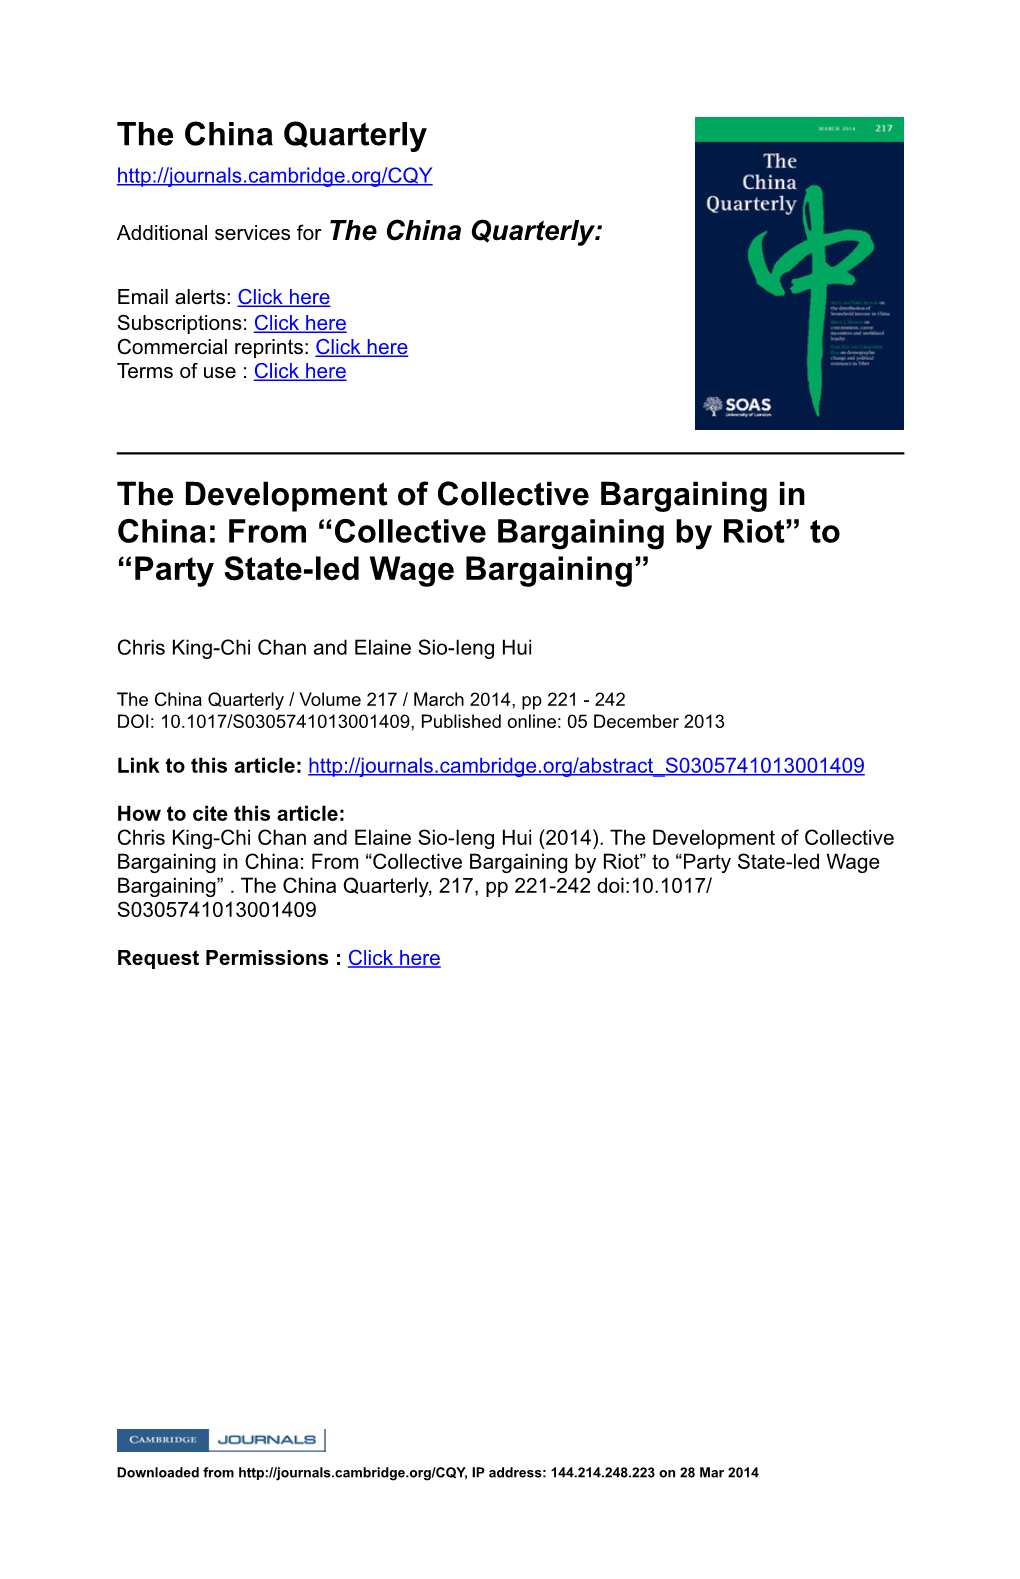 Collective Bargaining by Riot” to “Party State-Led Wage Bargaining”